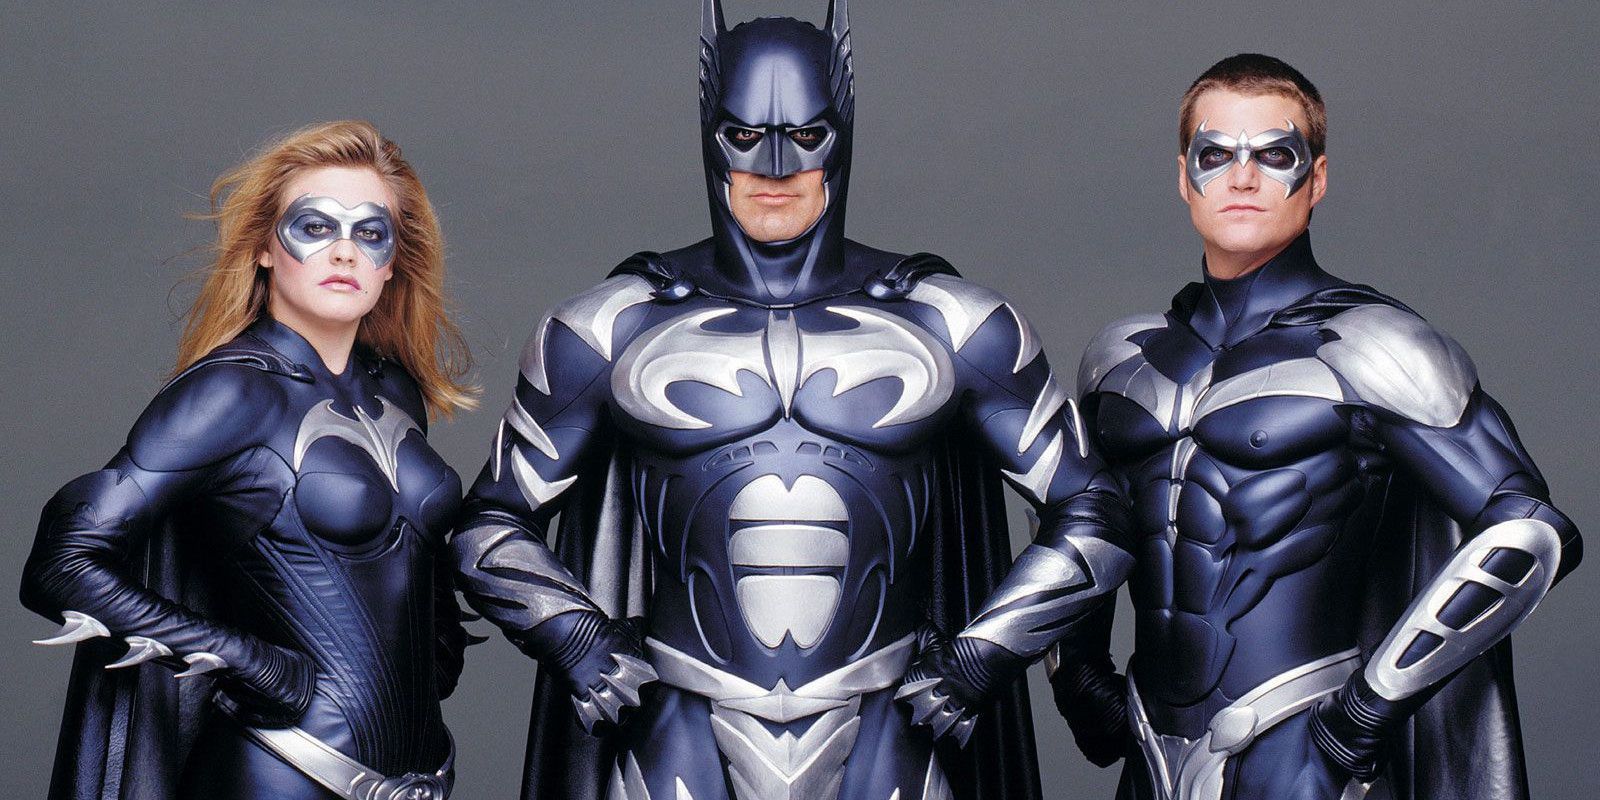 Every DC Comics LiveAction Movie Ranked From Worst to Best